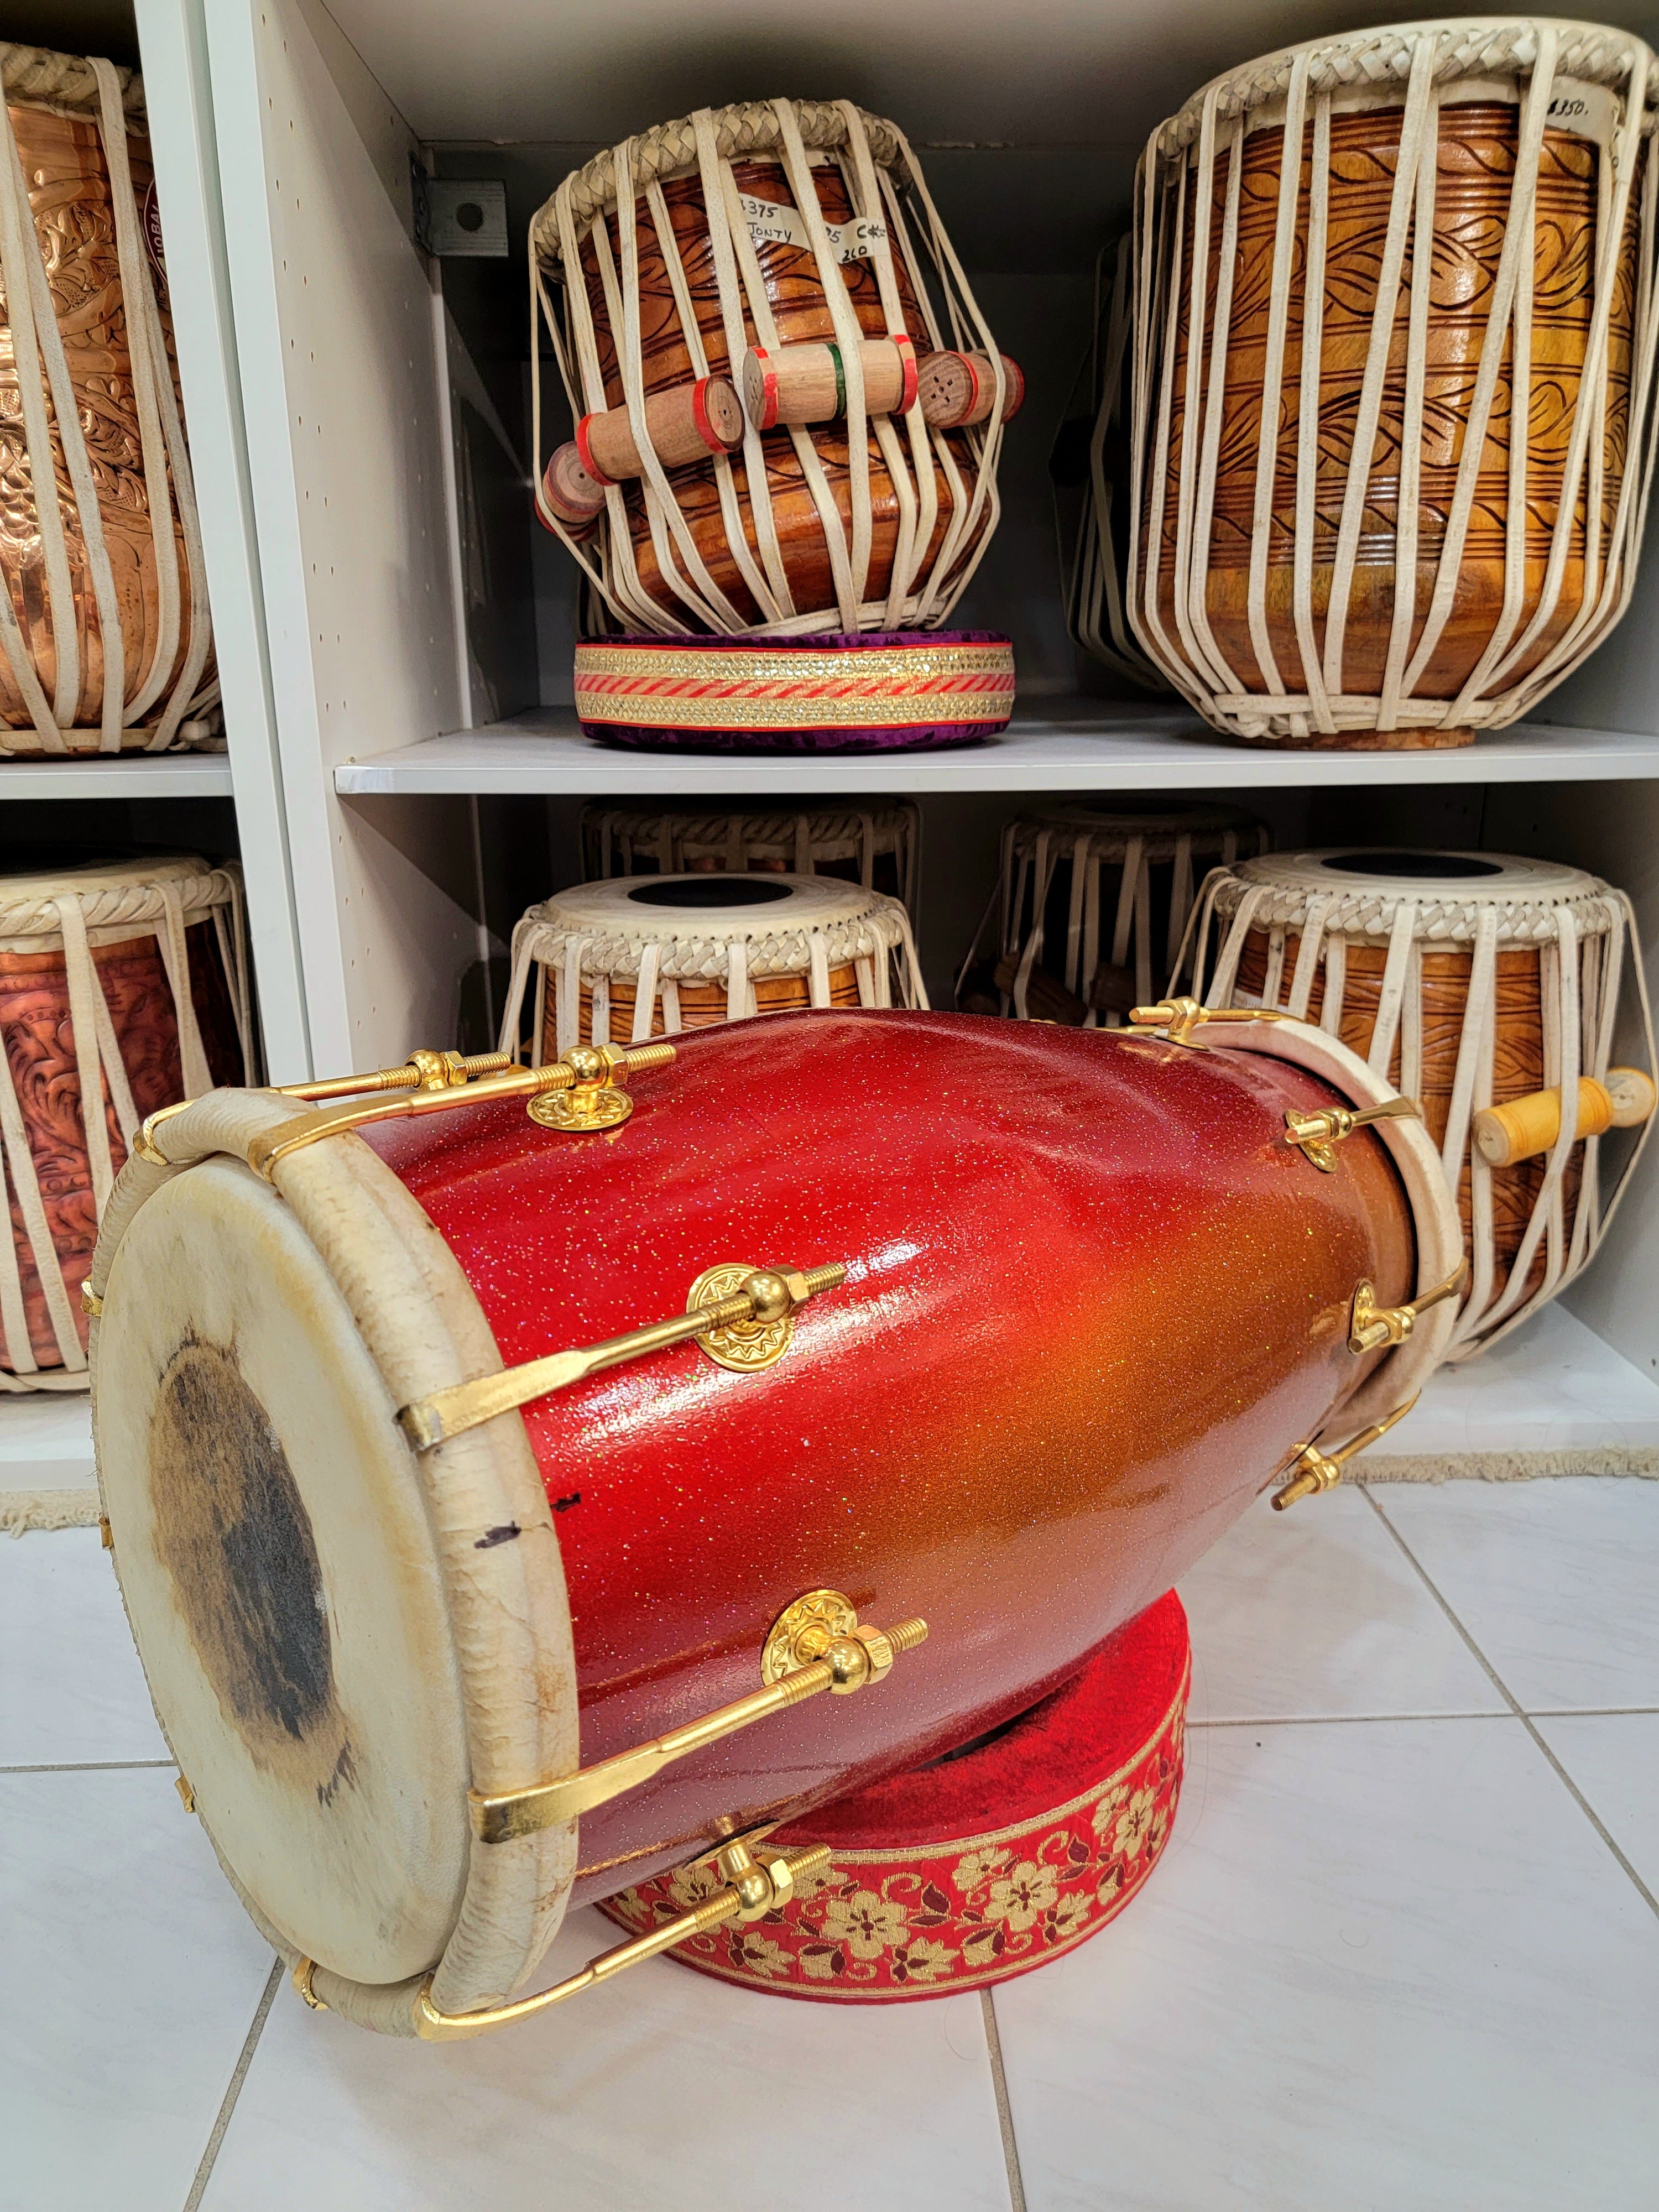 Mango Passion - Advanced Professional Dholak (discounted for Shyam + small external crack/chip)